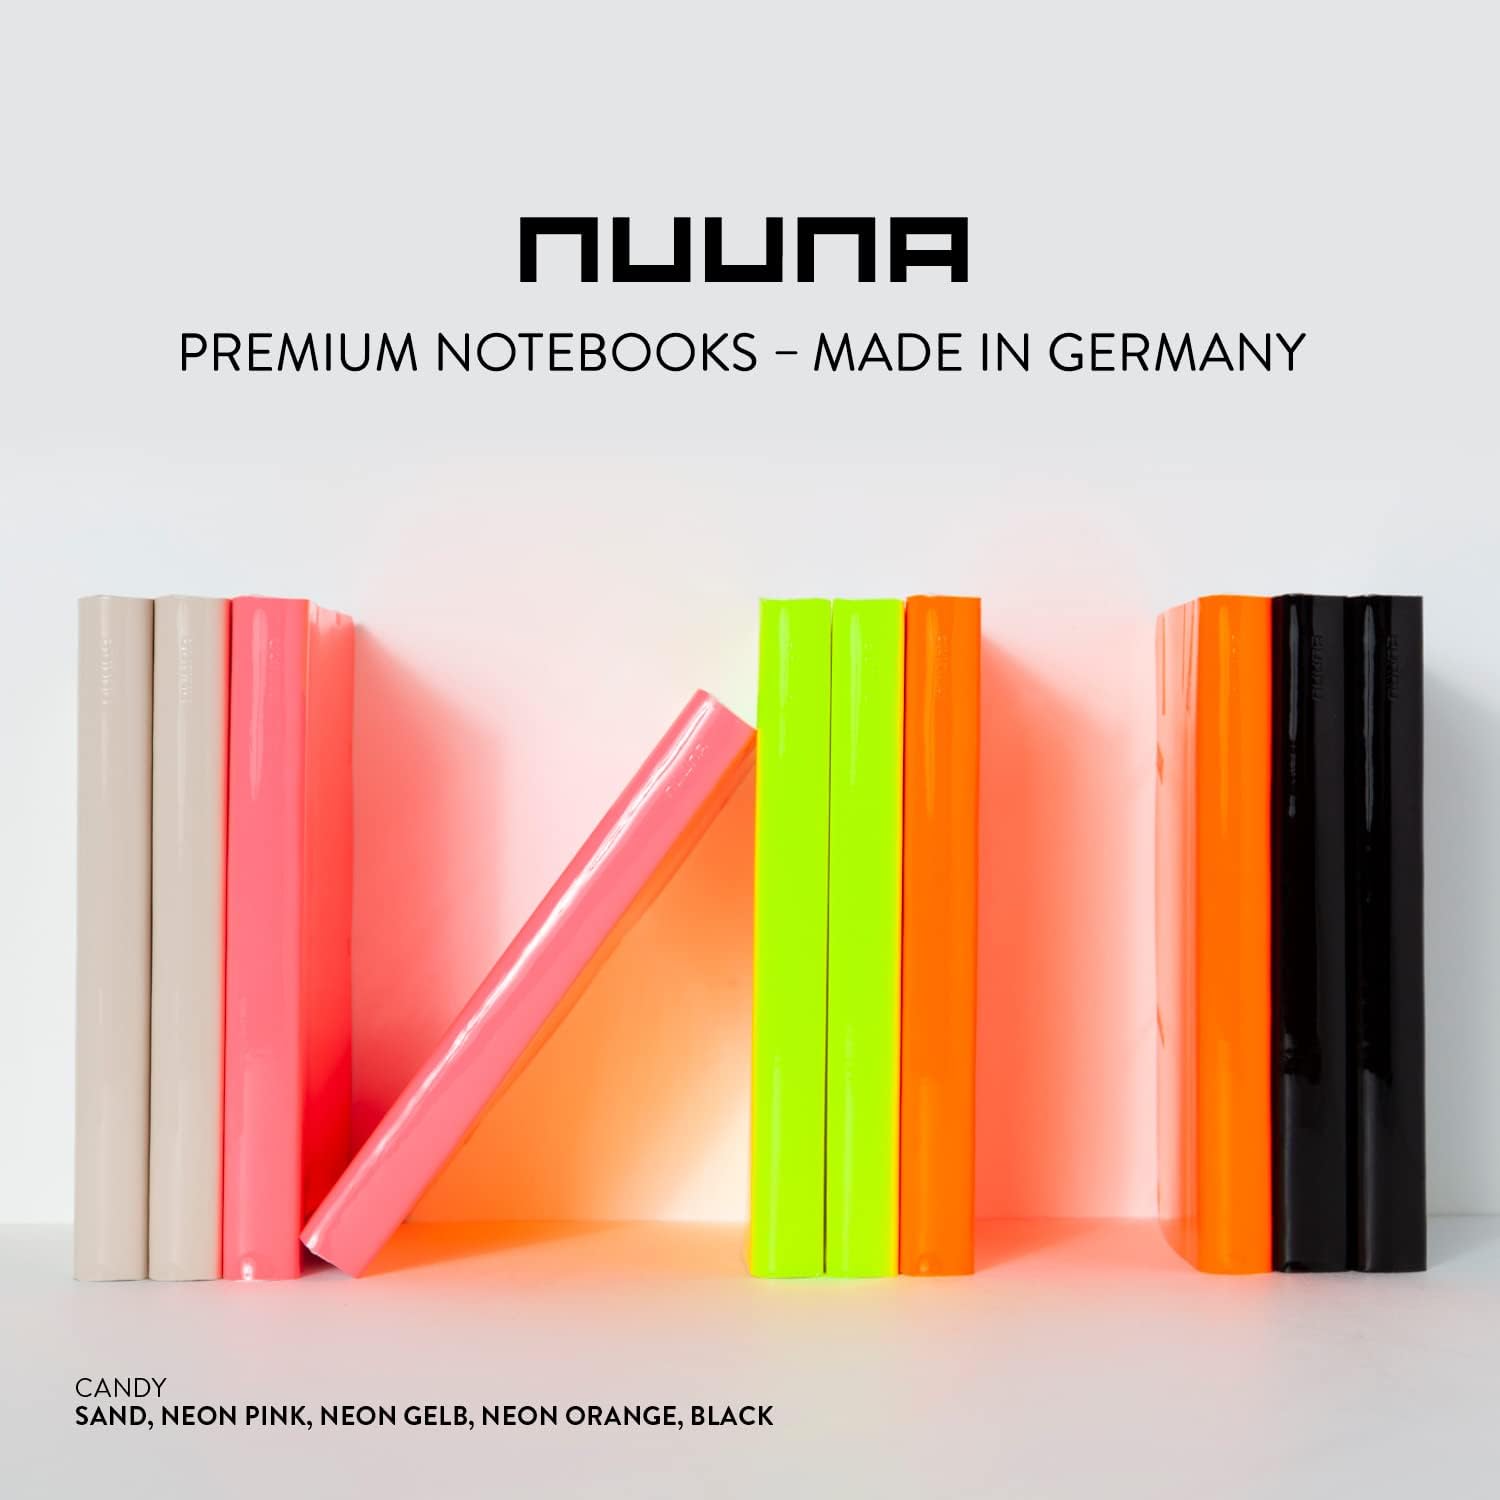 Nuuna Notebook Candy S NEON PINK